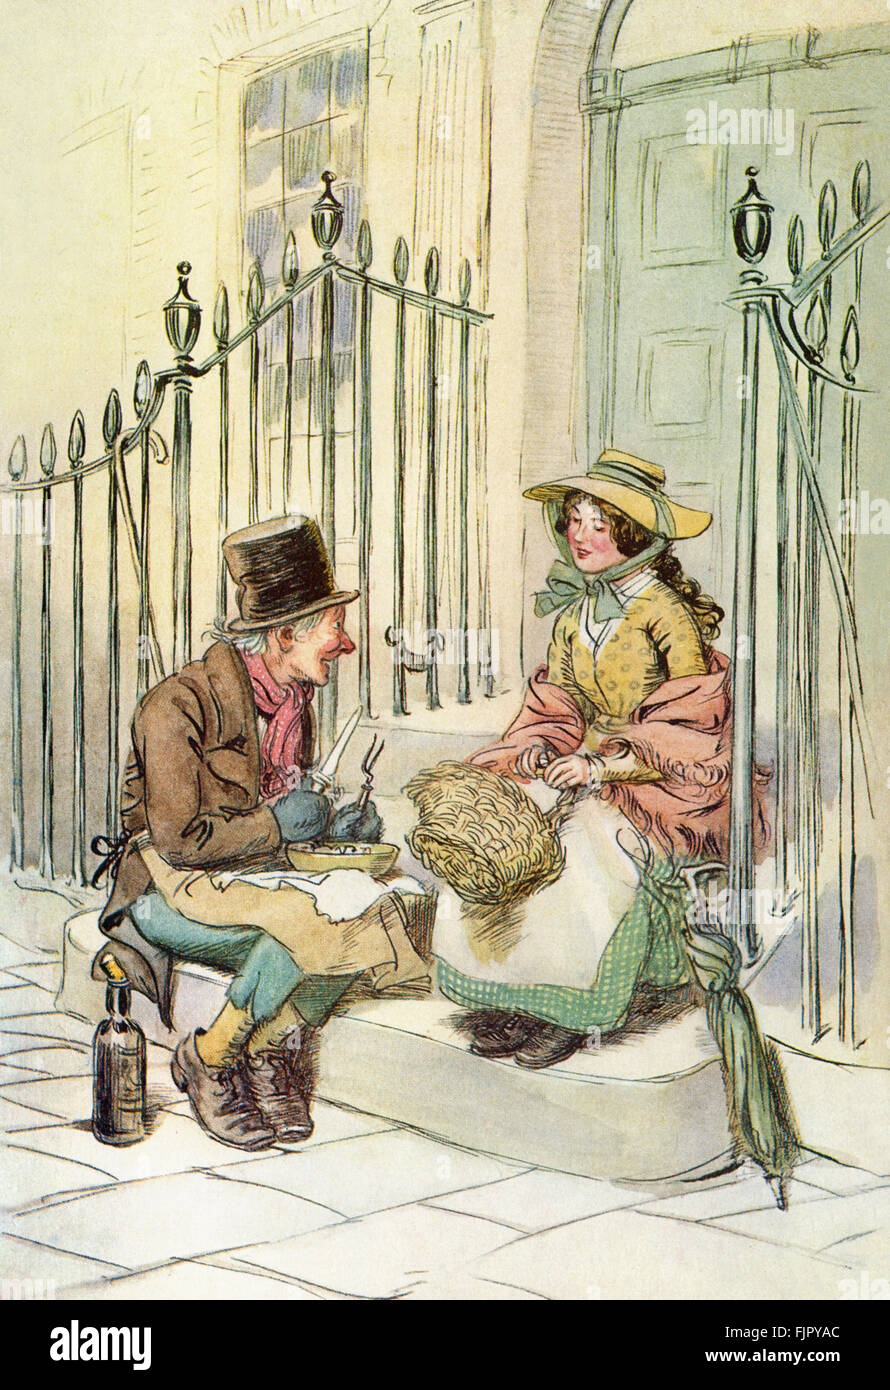 The Chimes by Charles Dickens. Illustrations by Hugh Thomson. First published 1844.  Caption reads: 'Meanwhile Toby took a long inspiration at the lid?'  shows Toby 'Trotty' Veck smelling the basket of cooked tripe his daughter Meg is holding. CD- English novelist 7 February 1812 – 9 June 1870. HT: English illustrator 1860 -1920. Stock Photo